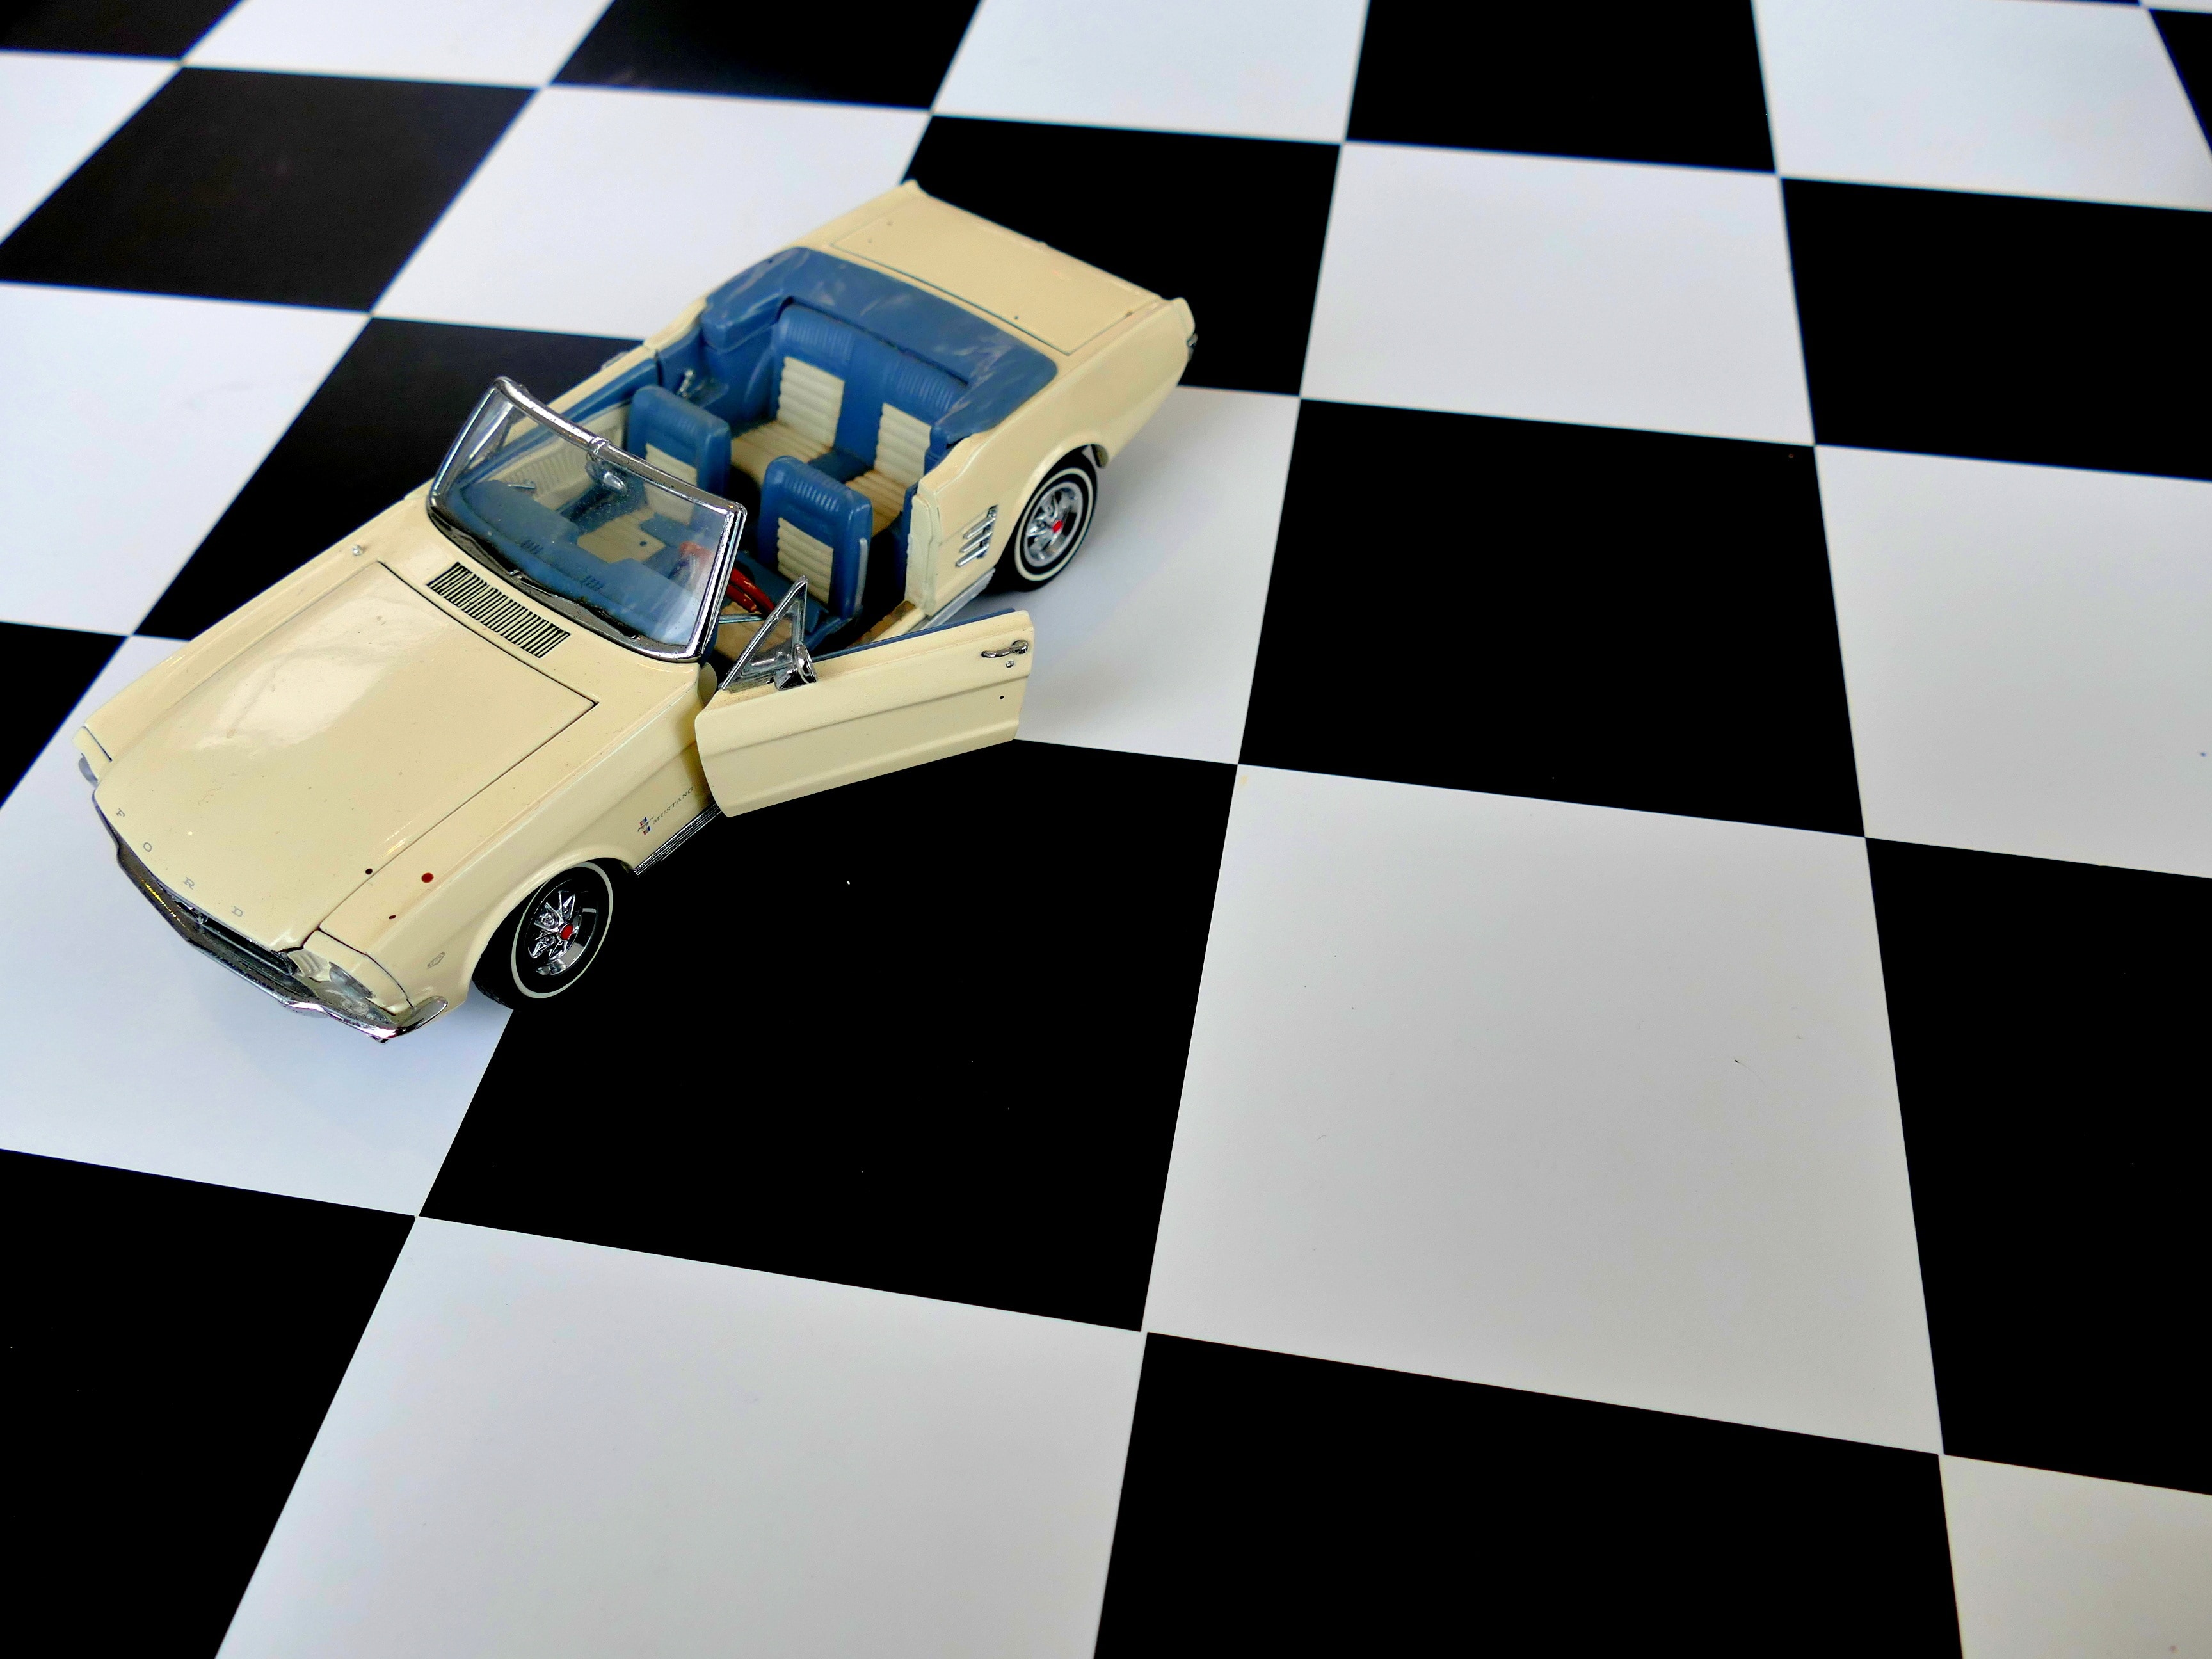 beige and blue car toy